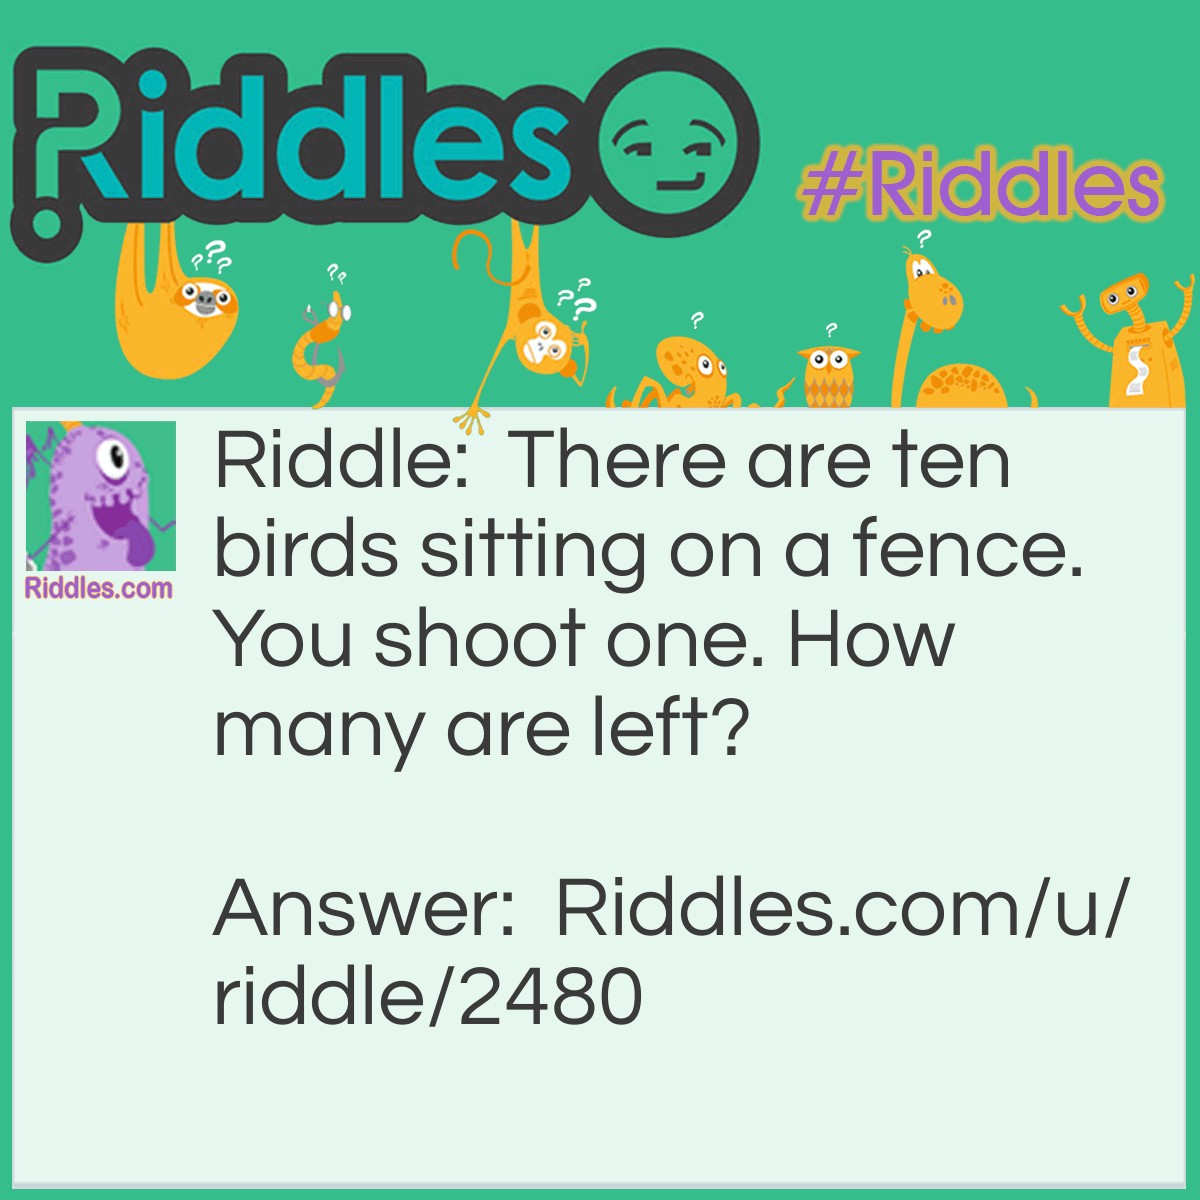 Riddle: There are ten birds sitting on a fence. You shoot one. How many are left? Answer: None are left. All the others are scared away because of the gunshot.